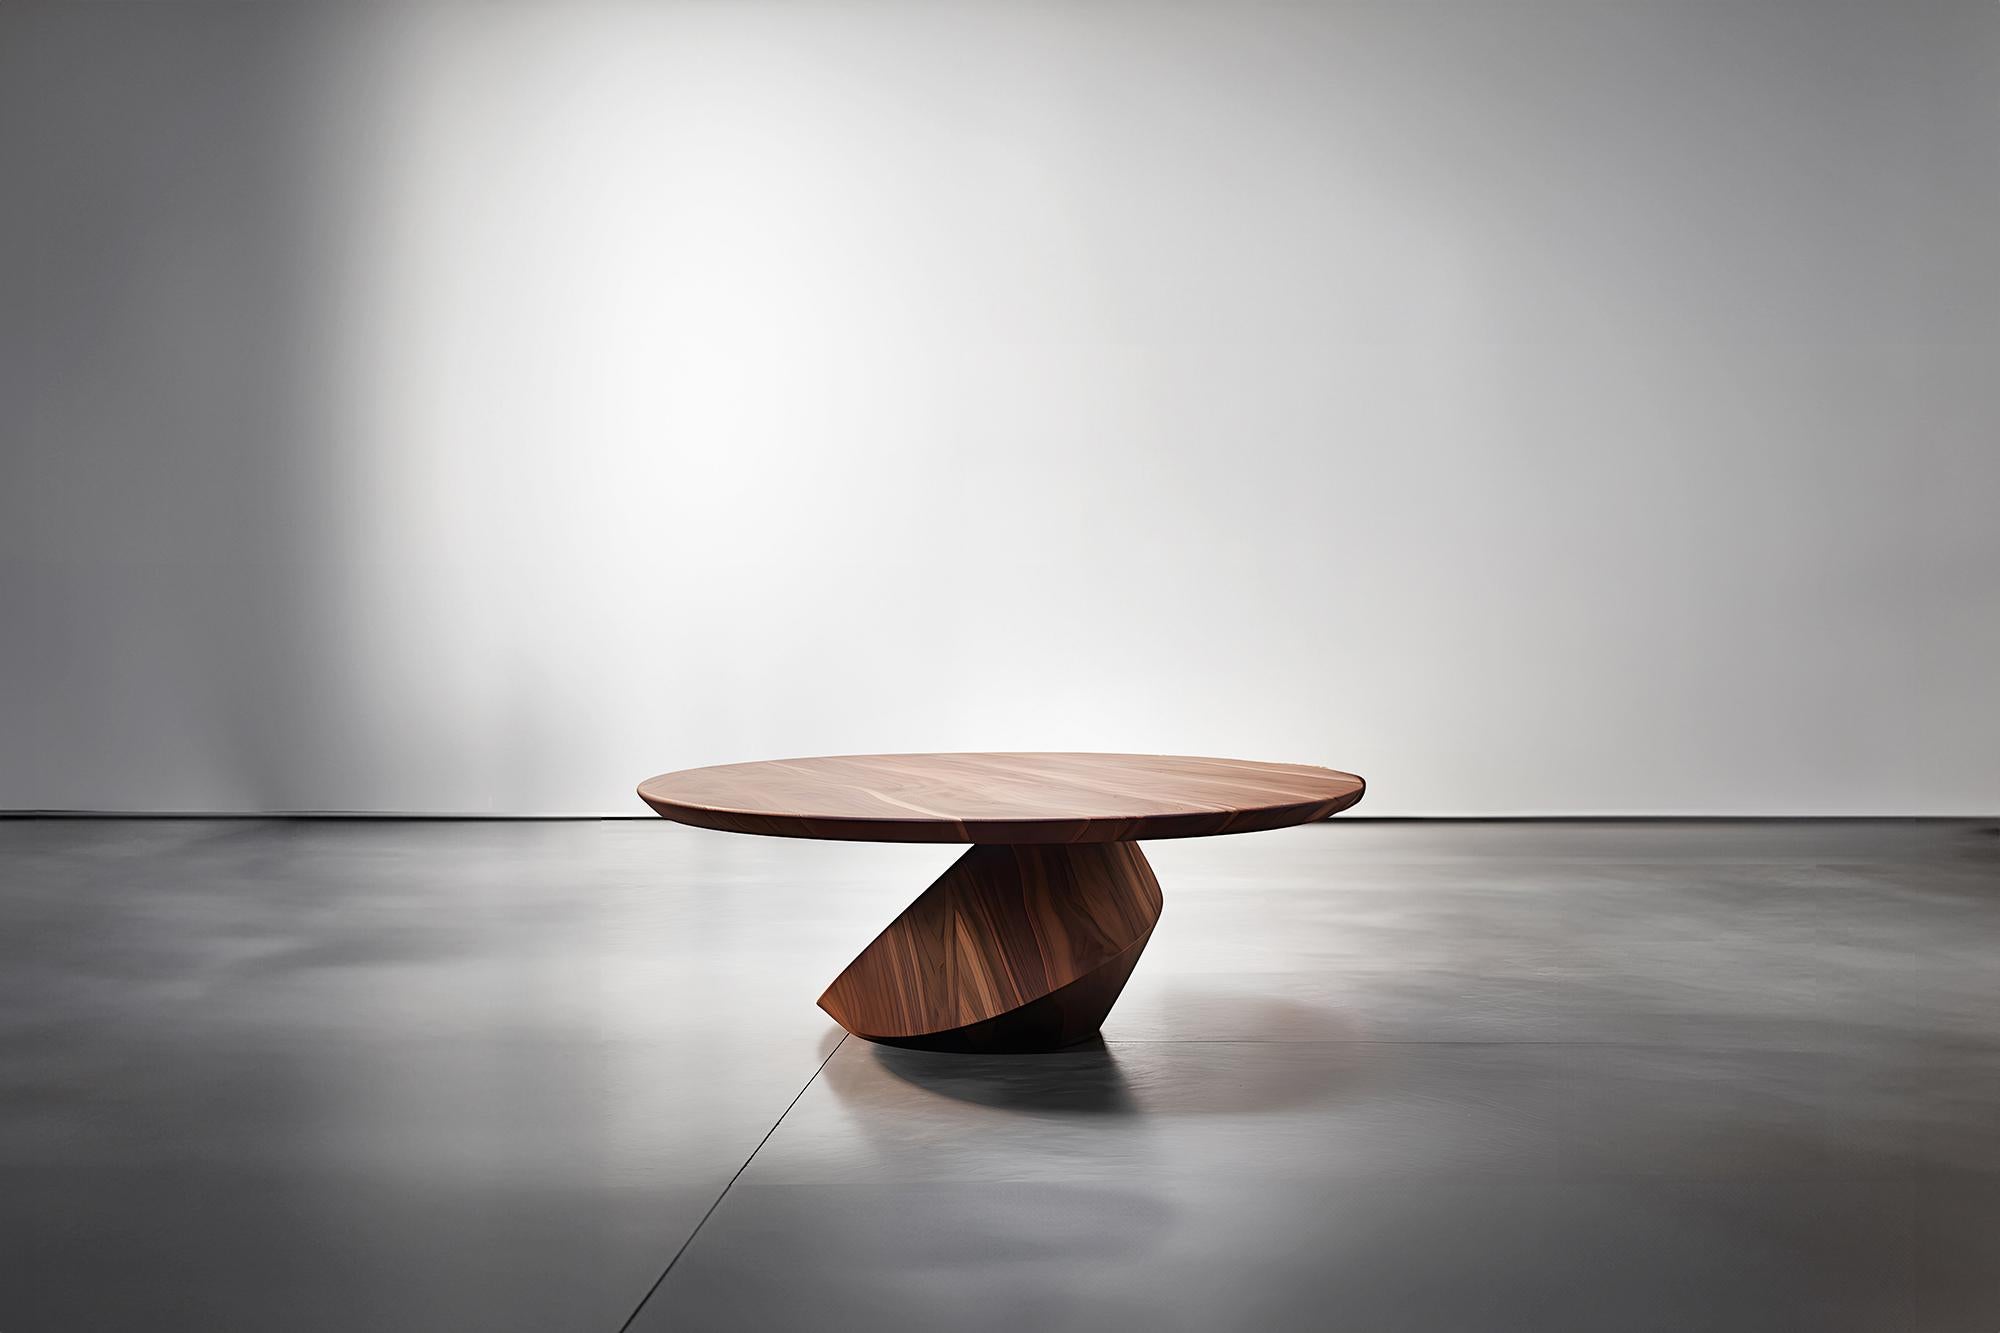 Sculptural Coffee Table Made of Solid Wood, Center Table Solace S40 by Joel Escalona


The Solace table series, designed by Joel Escalona, is a furniture collection that exudes balance and presence, thanks to its sensuous, dense, and irregular